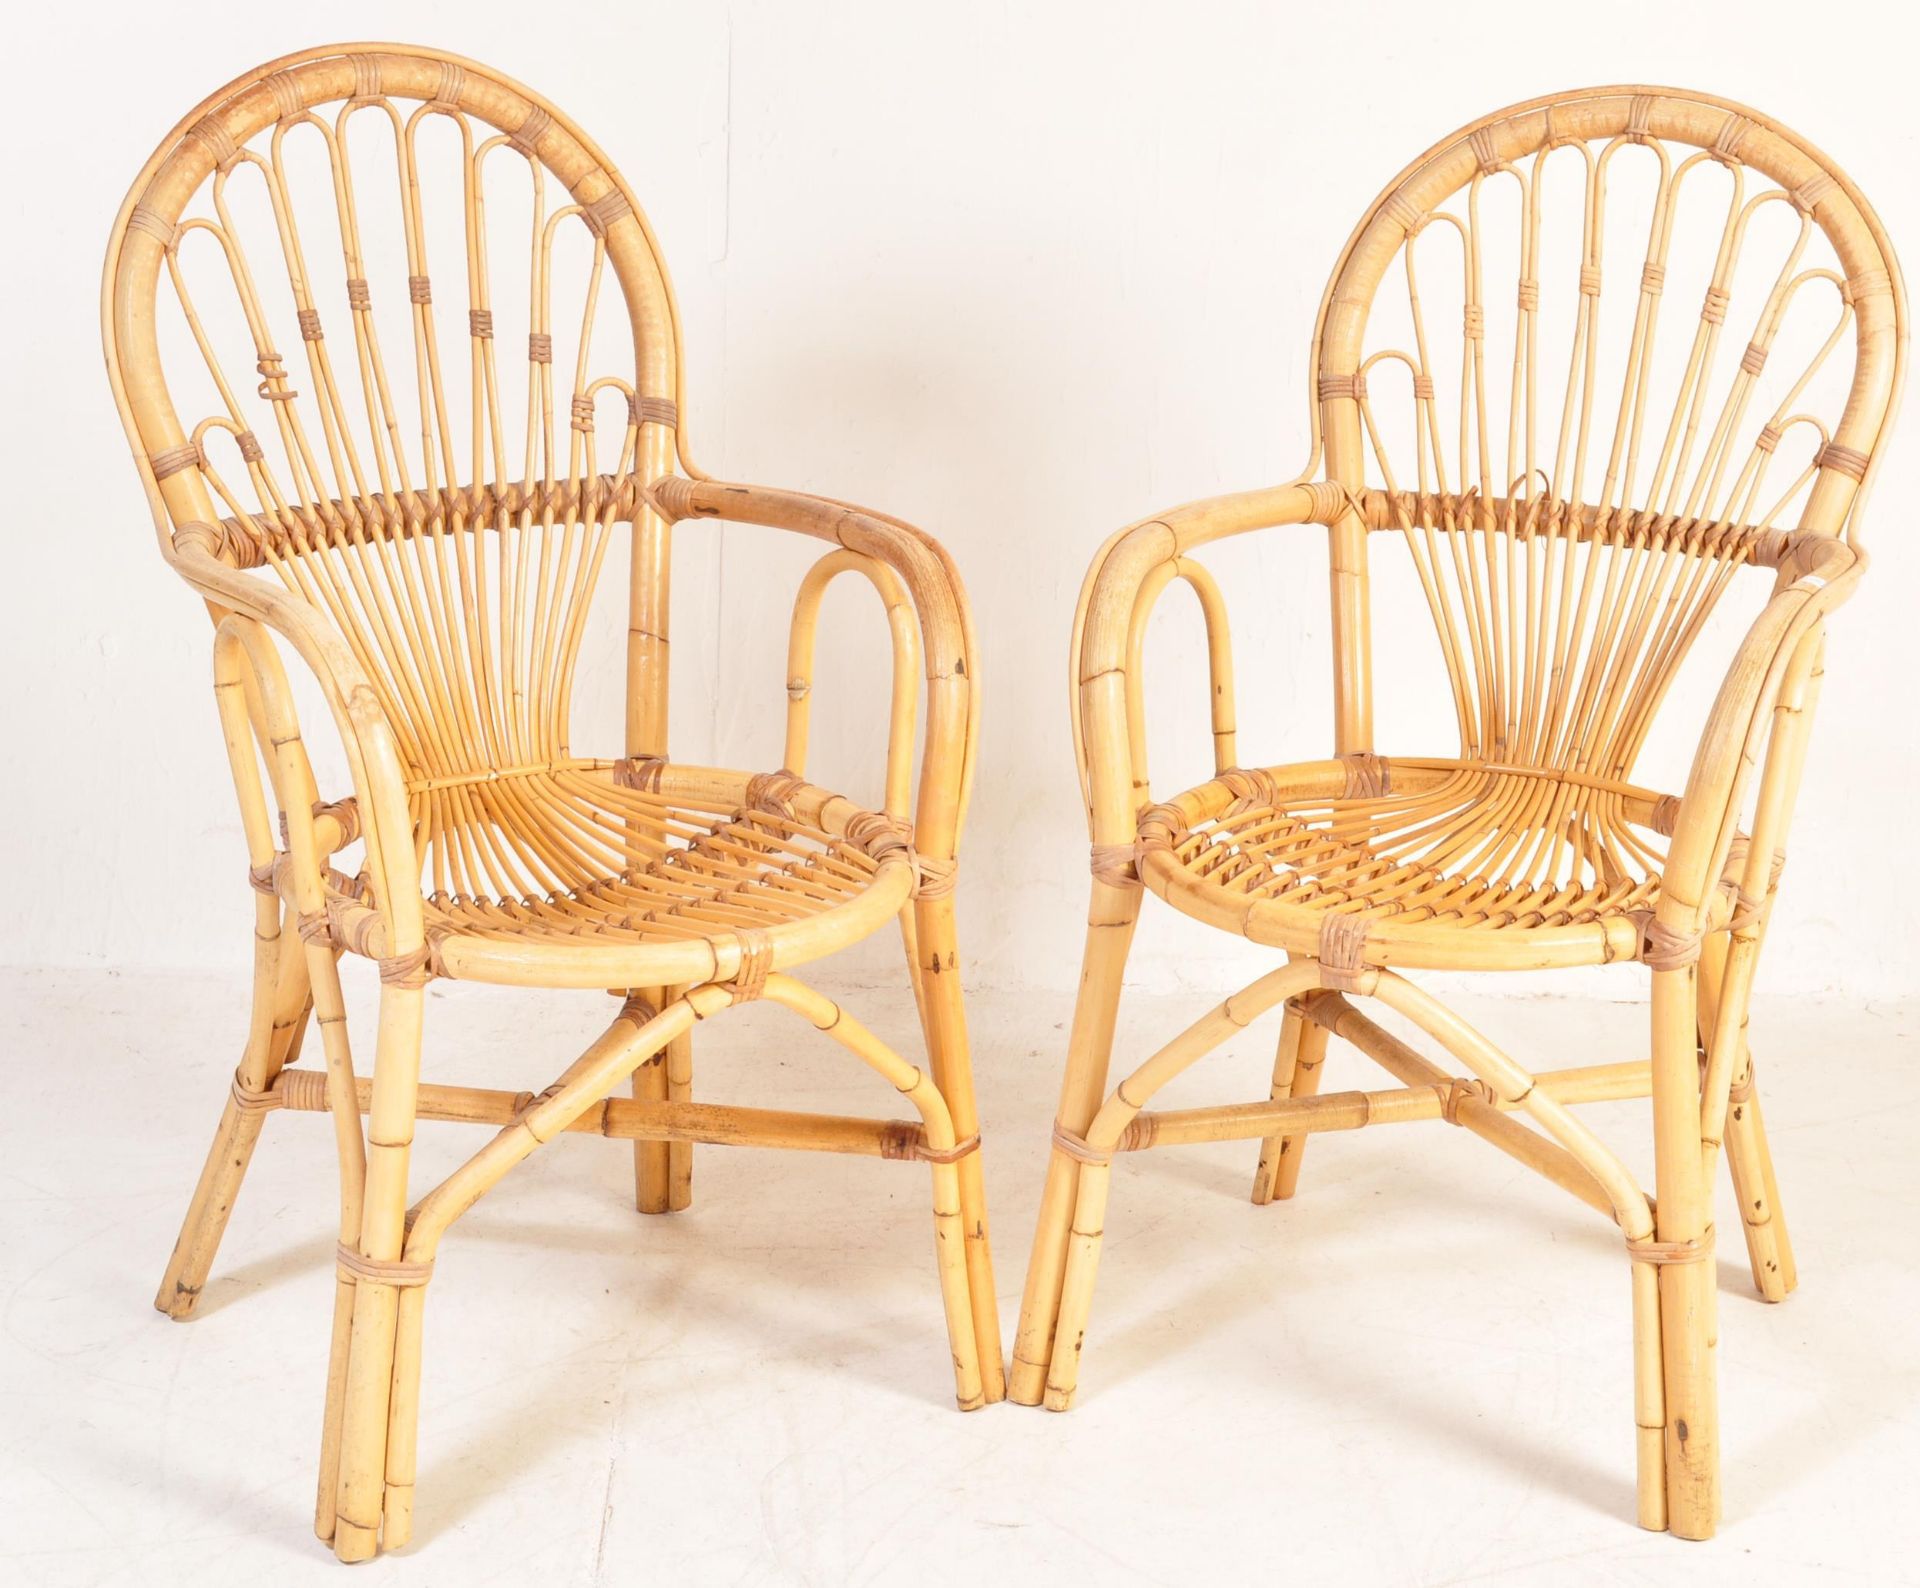 MATCHING PAIR OF ITALIAN BAMBOO AND WICKER ARMCHAIRS - Image 2 of 7